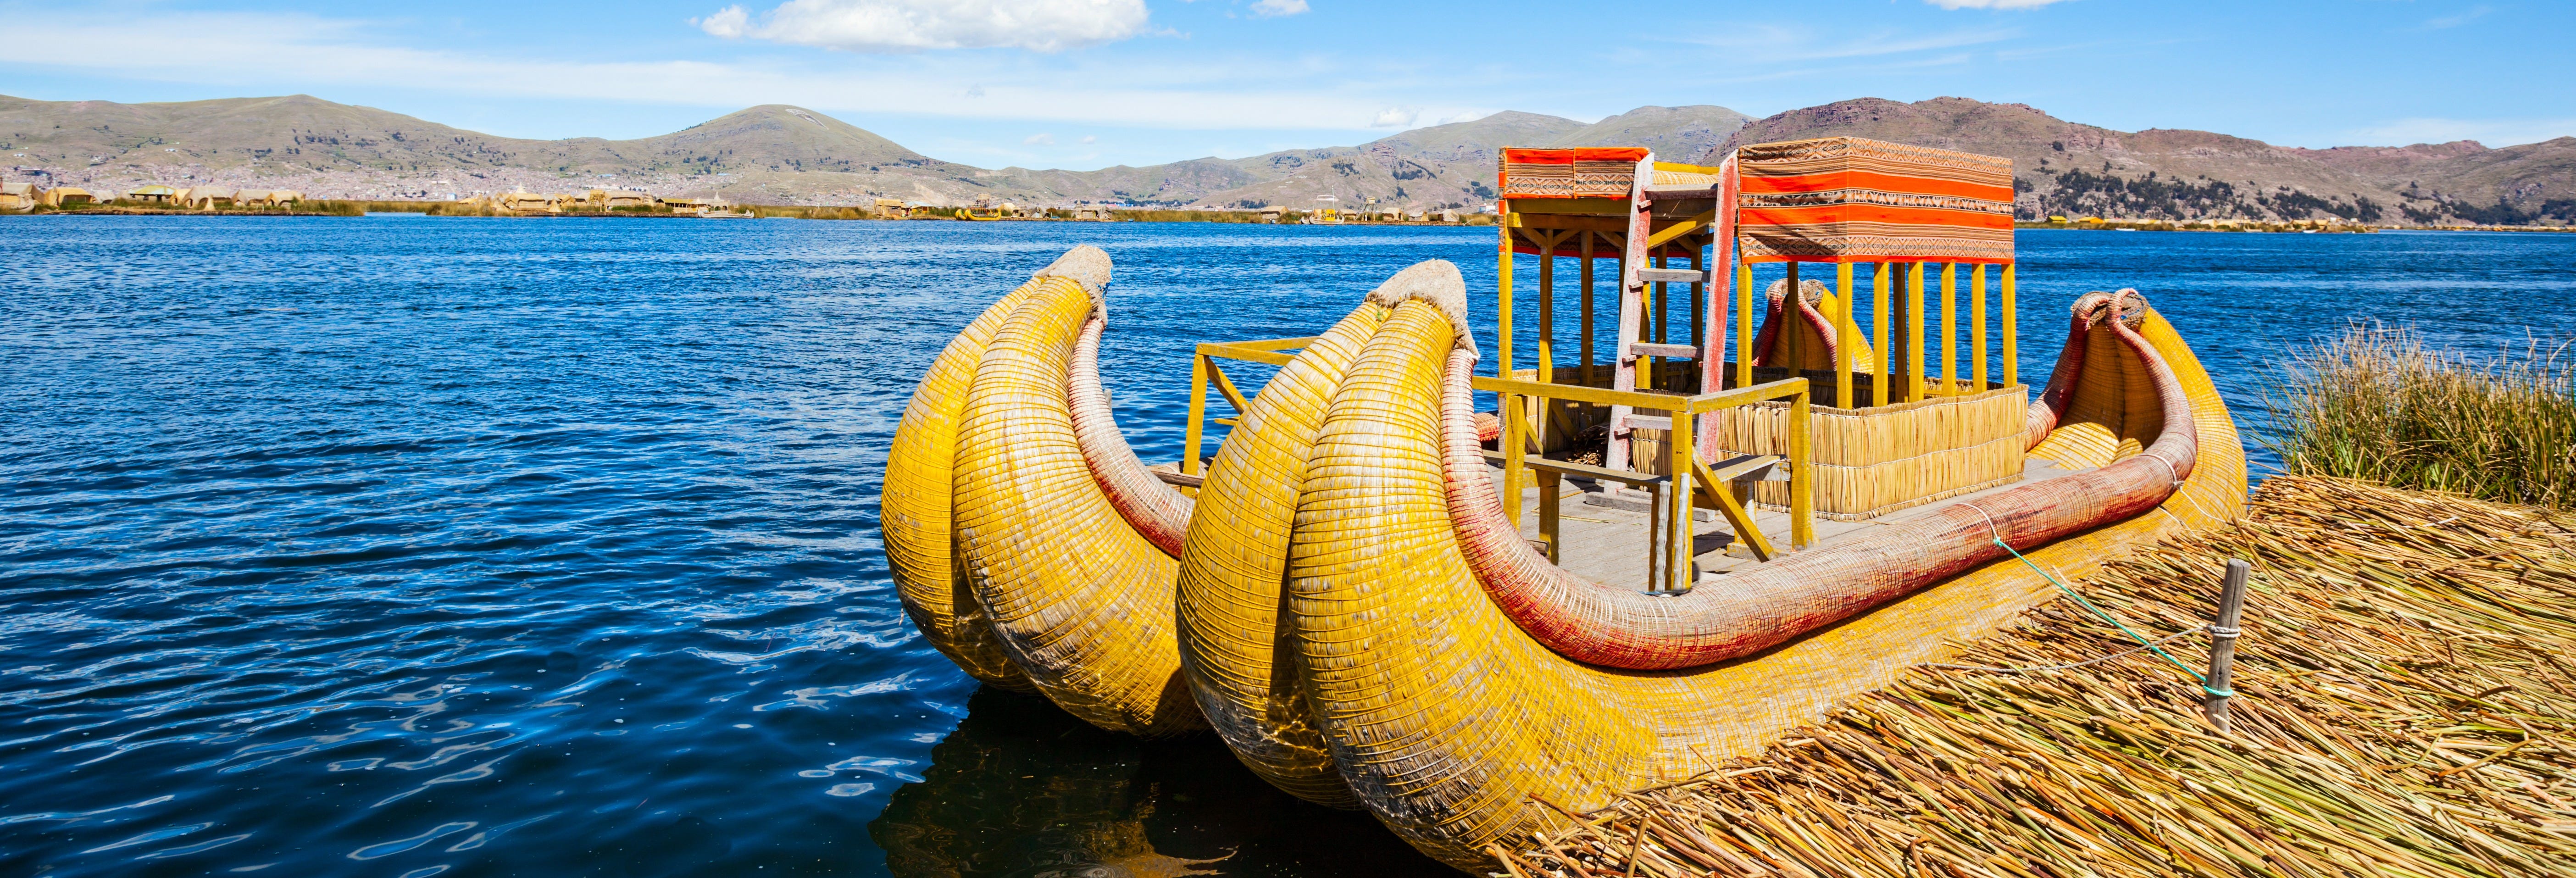 Uros Islands Excursion + Taquile Island Hike